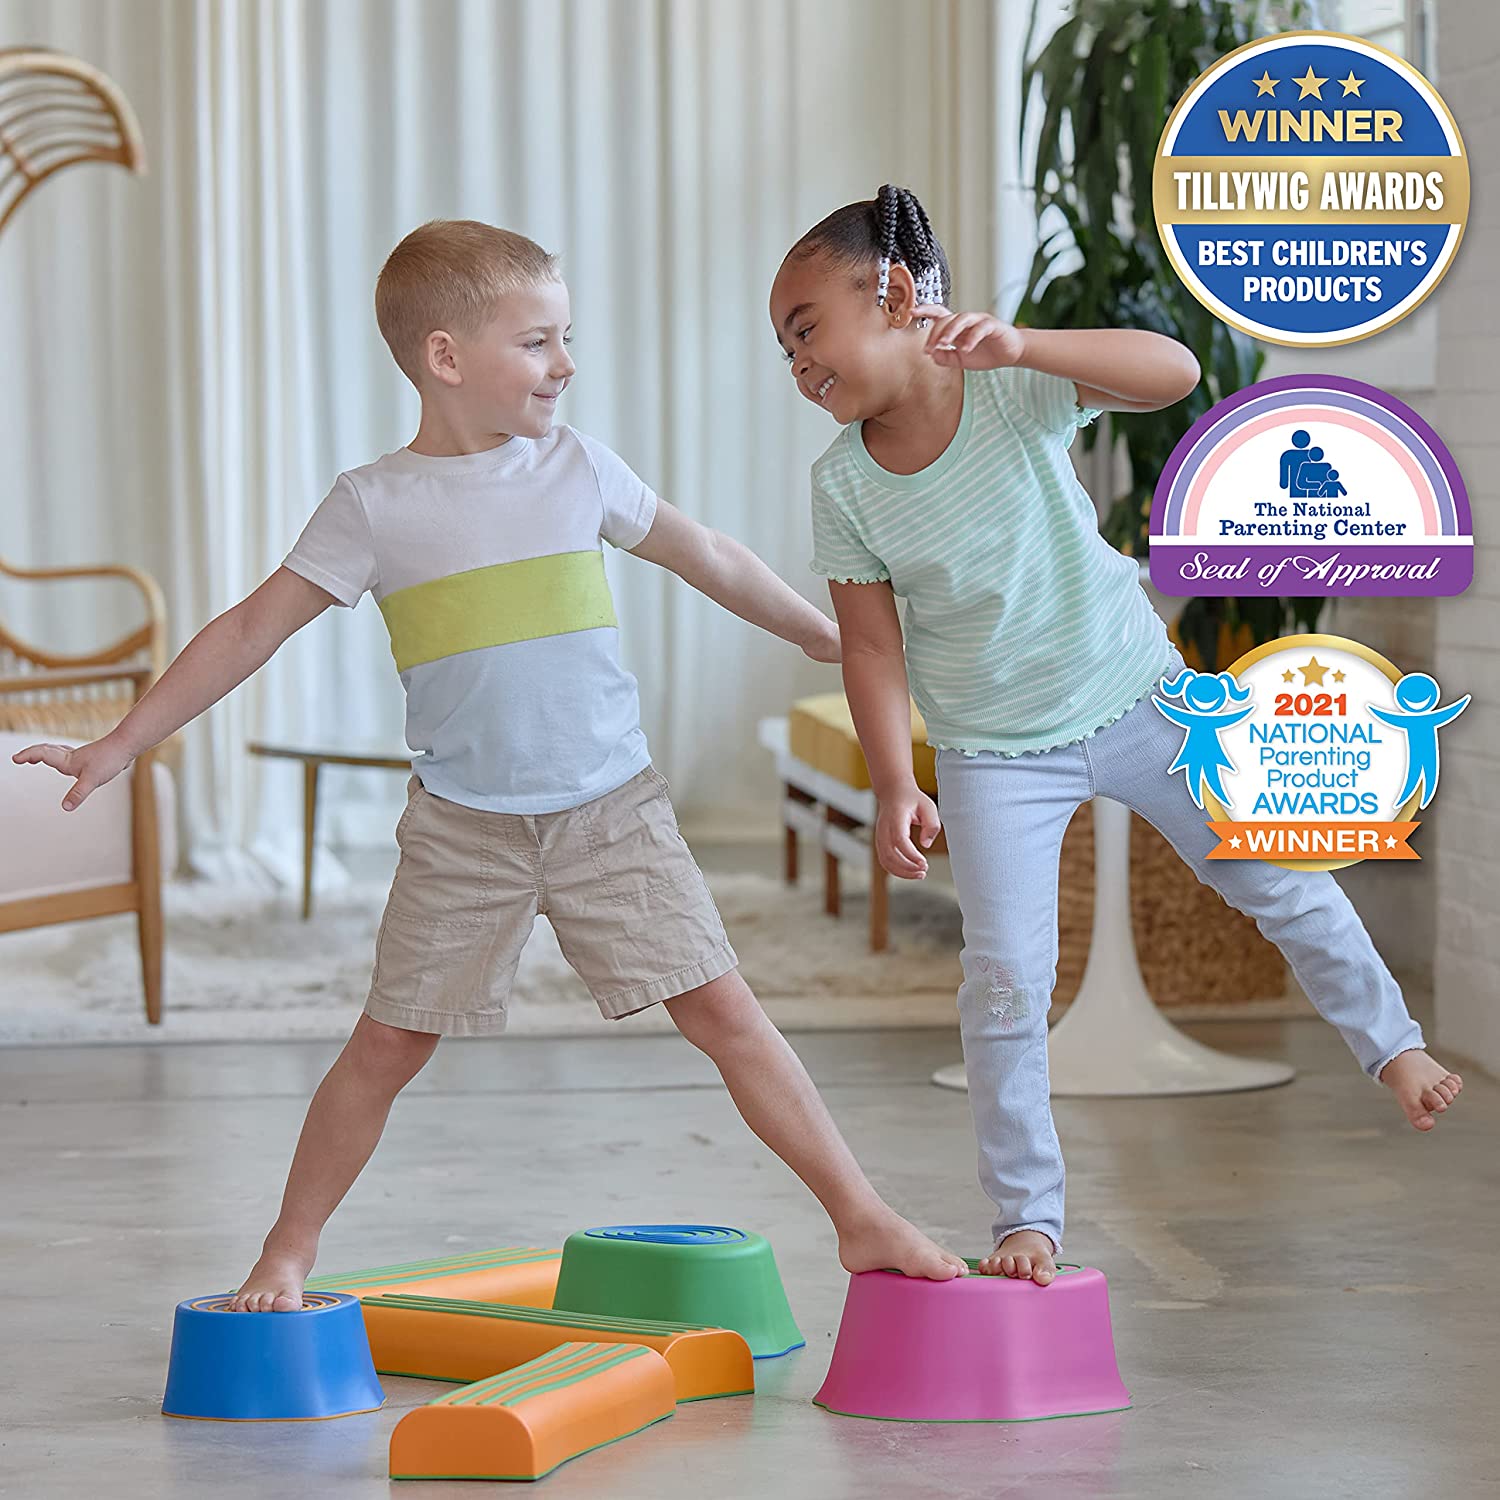 edxeducation Step-a-Trail - 6 Piece Obstacle Course for Kids - Indoor and Outdoor - Build Coordination and Confidence - Physical and Imaginative Play